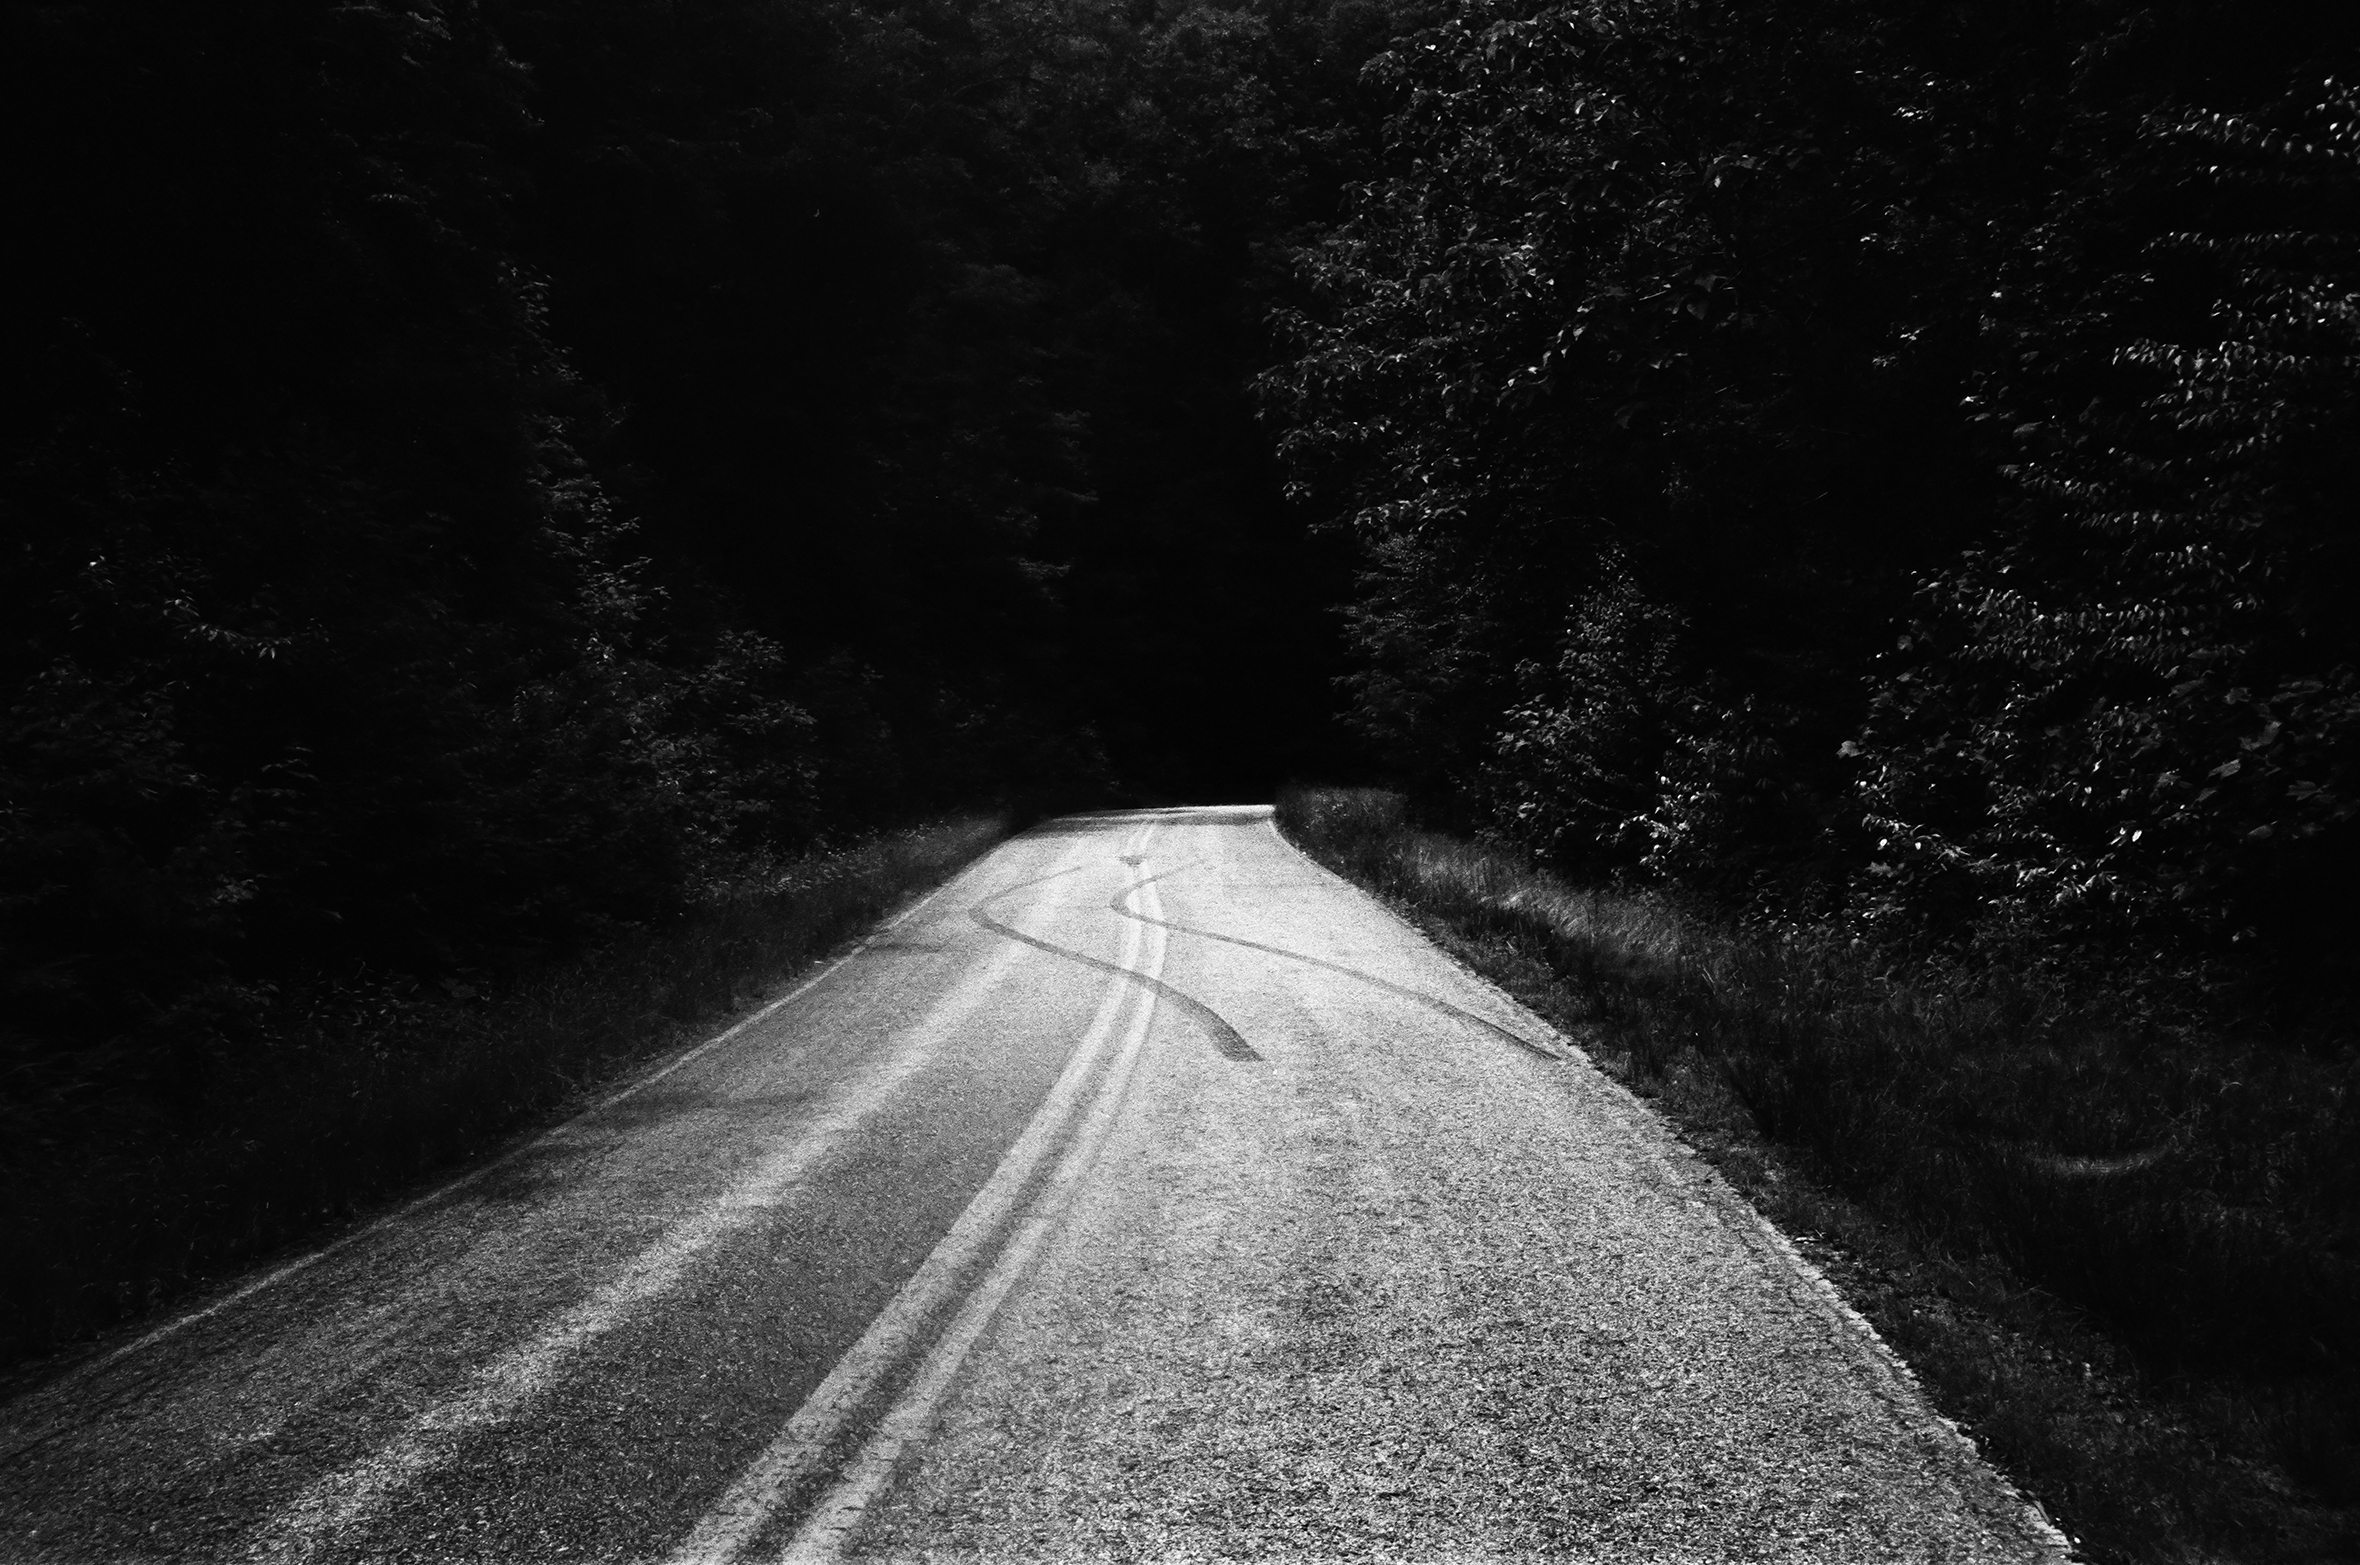 A short length of a two-lane road in the woods at night curving off to the right in the near distance. There are skid marks from the right lane into the left and then back to right.